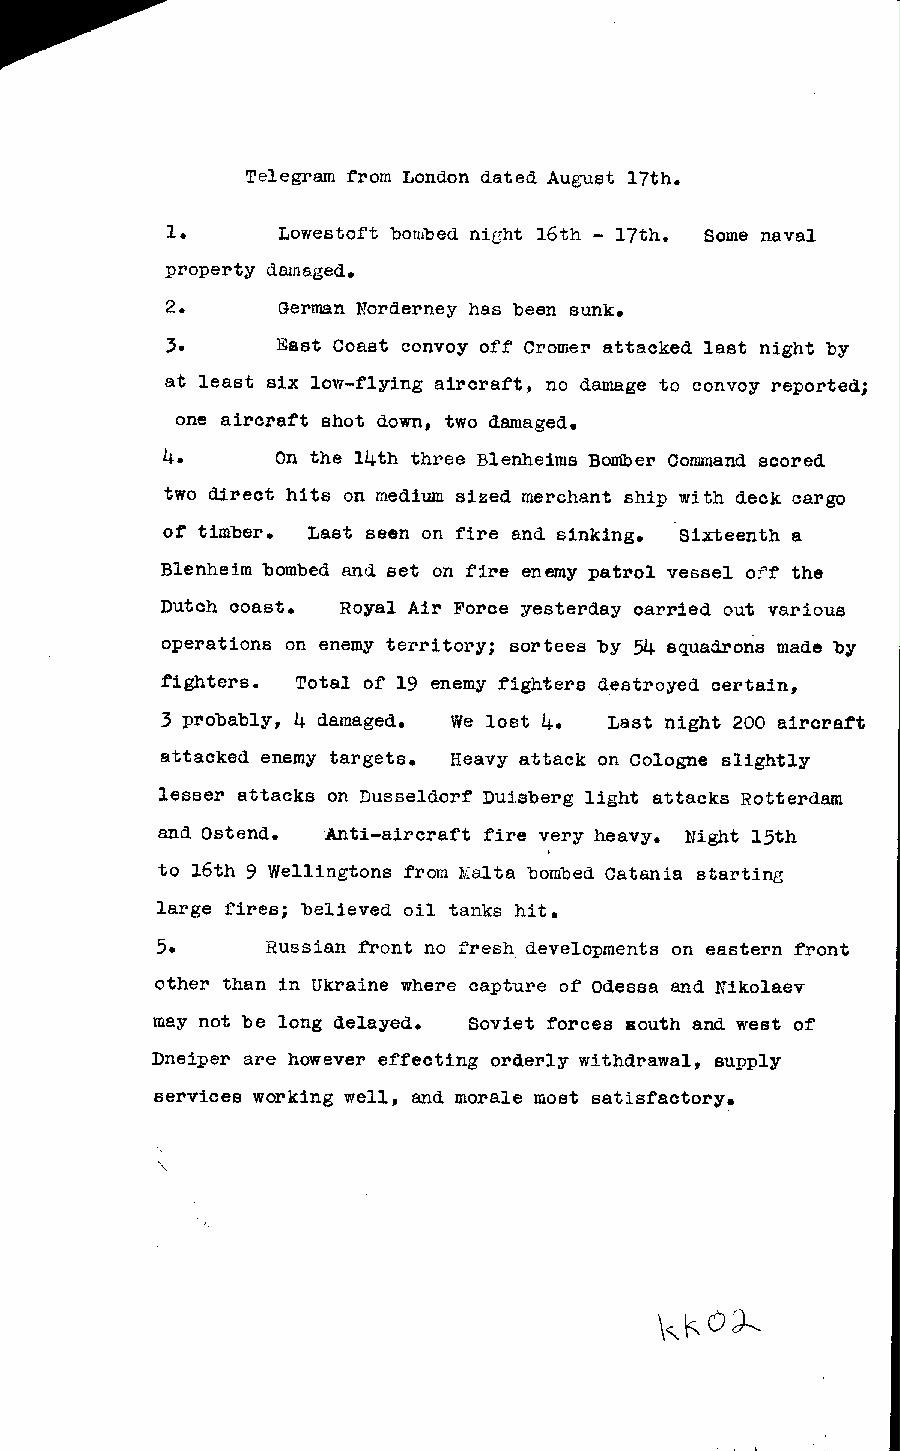 [a322kk02.jpg] - Report on military situation 8/17/41